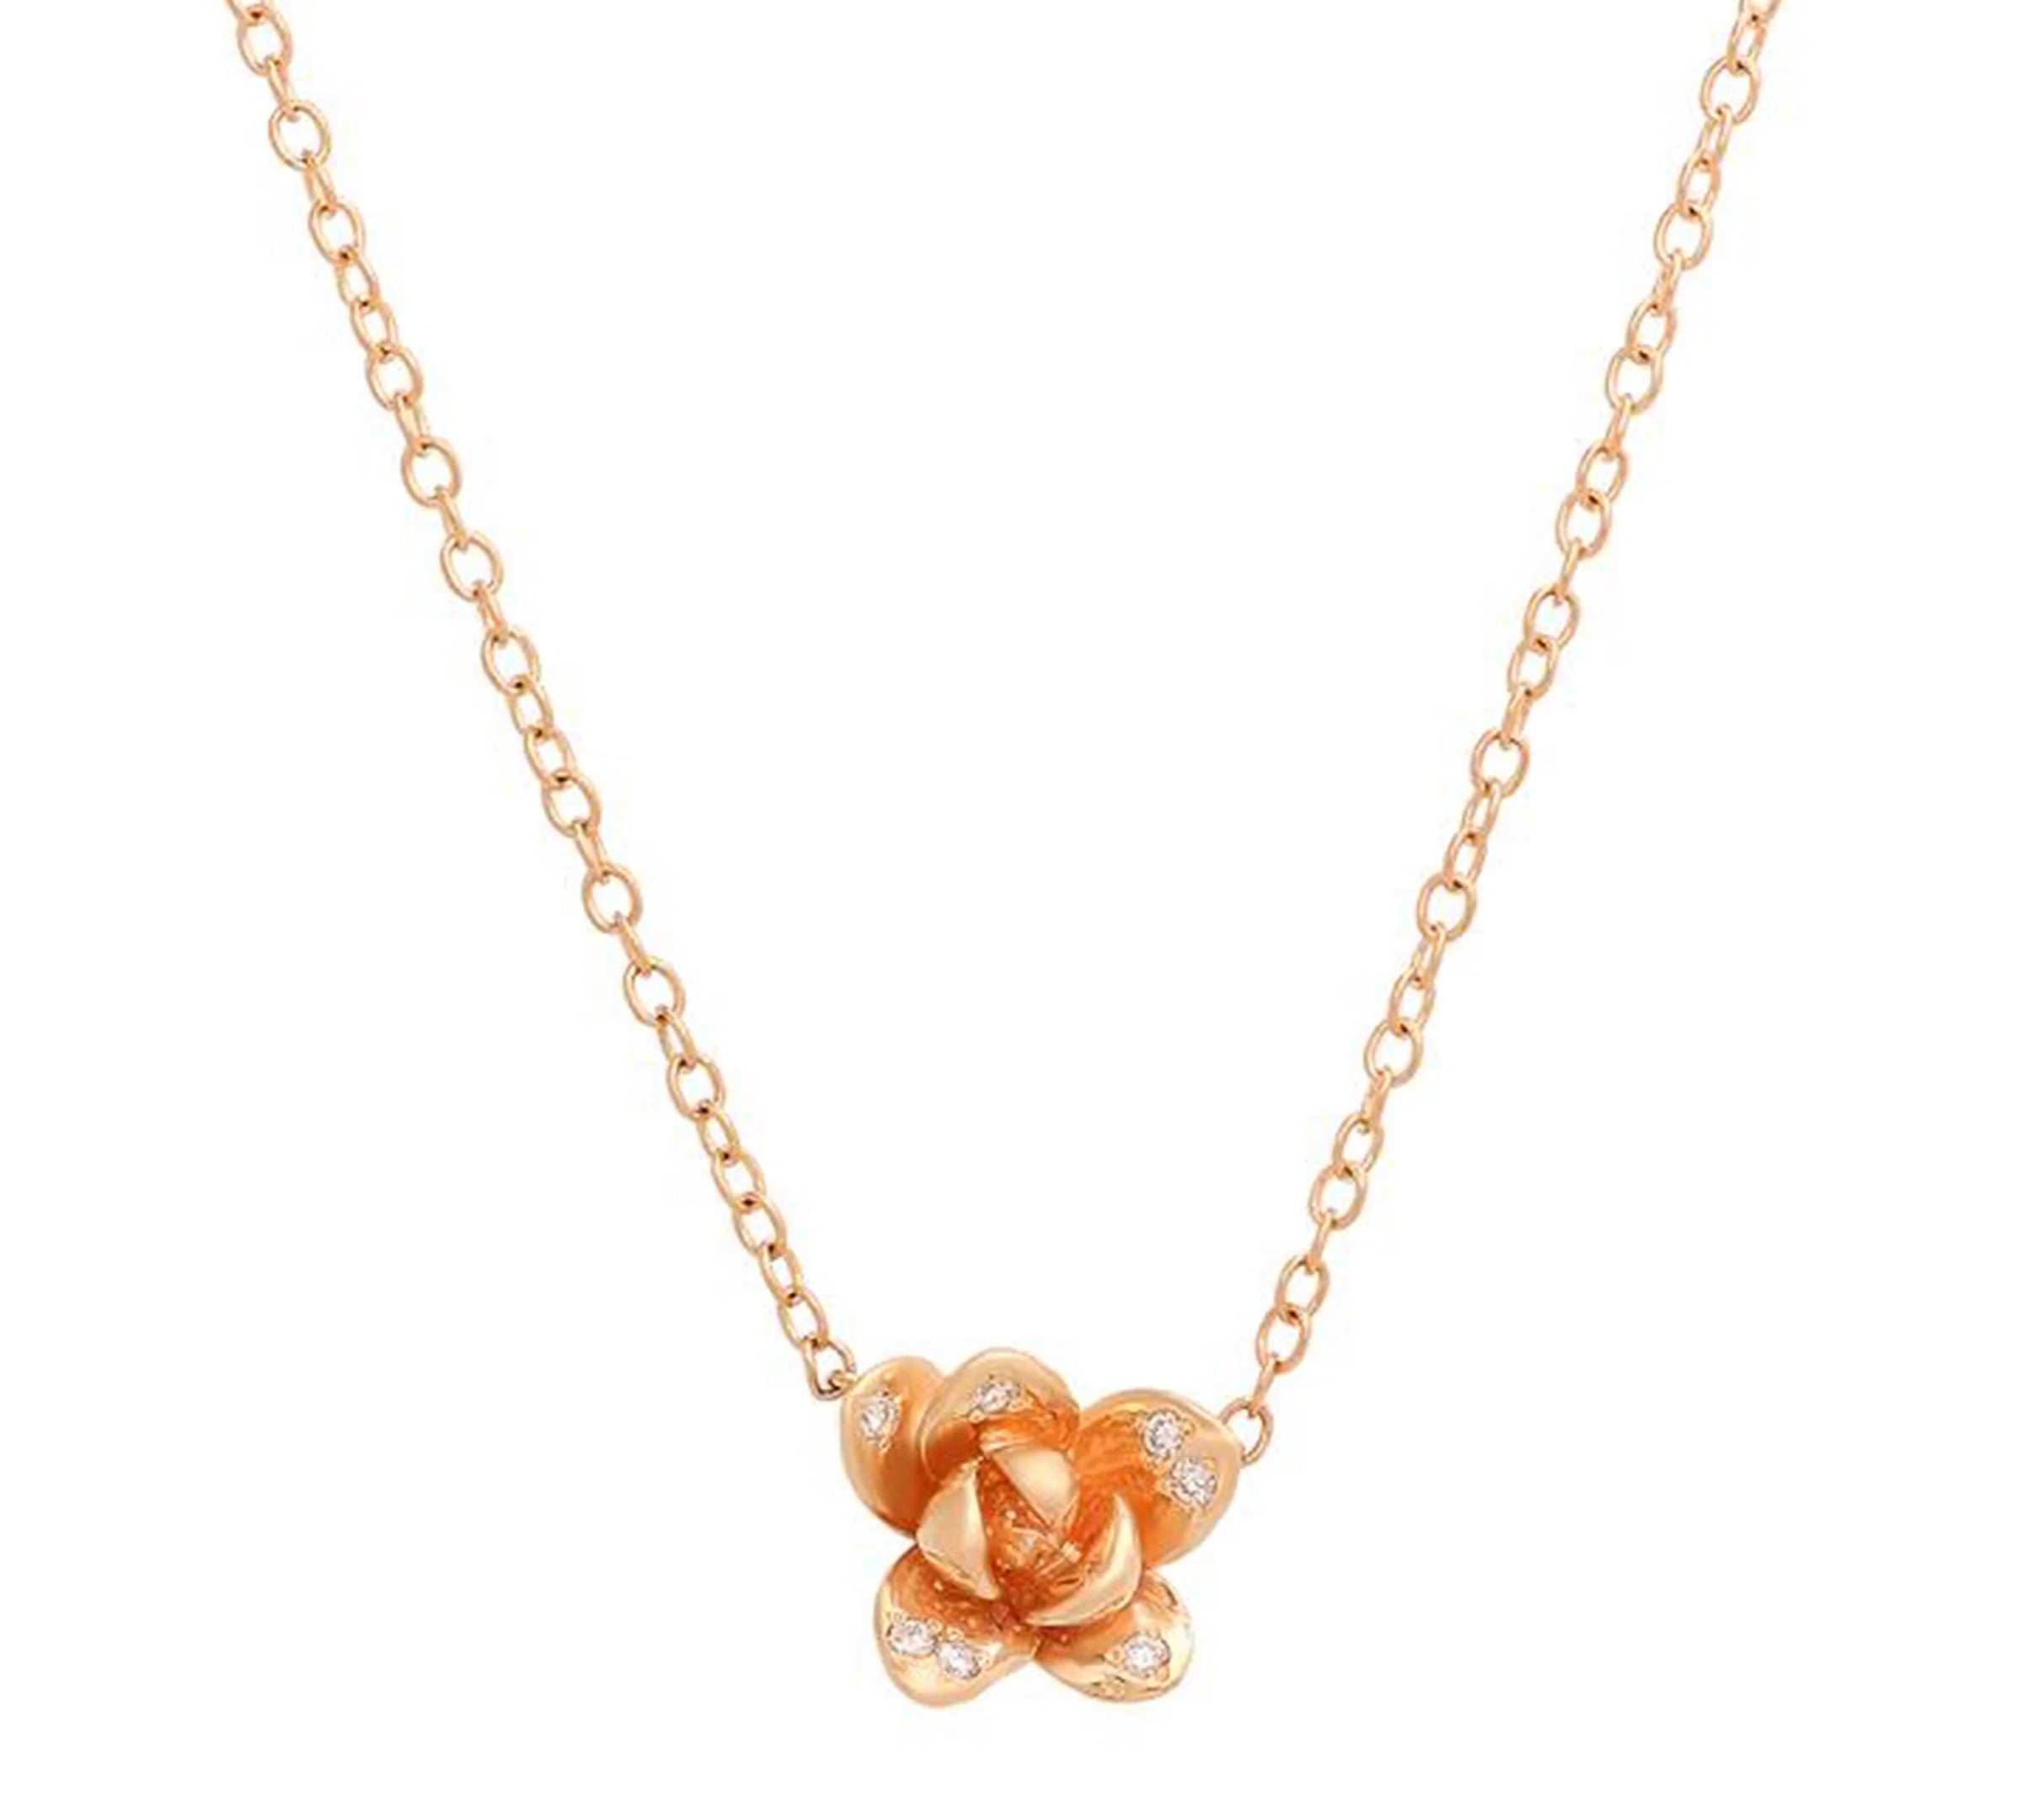 Blossom Necklace Pendant Elisabeth Bell Jewelry Rose Gold  